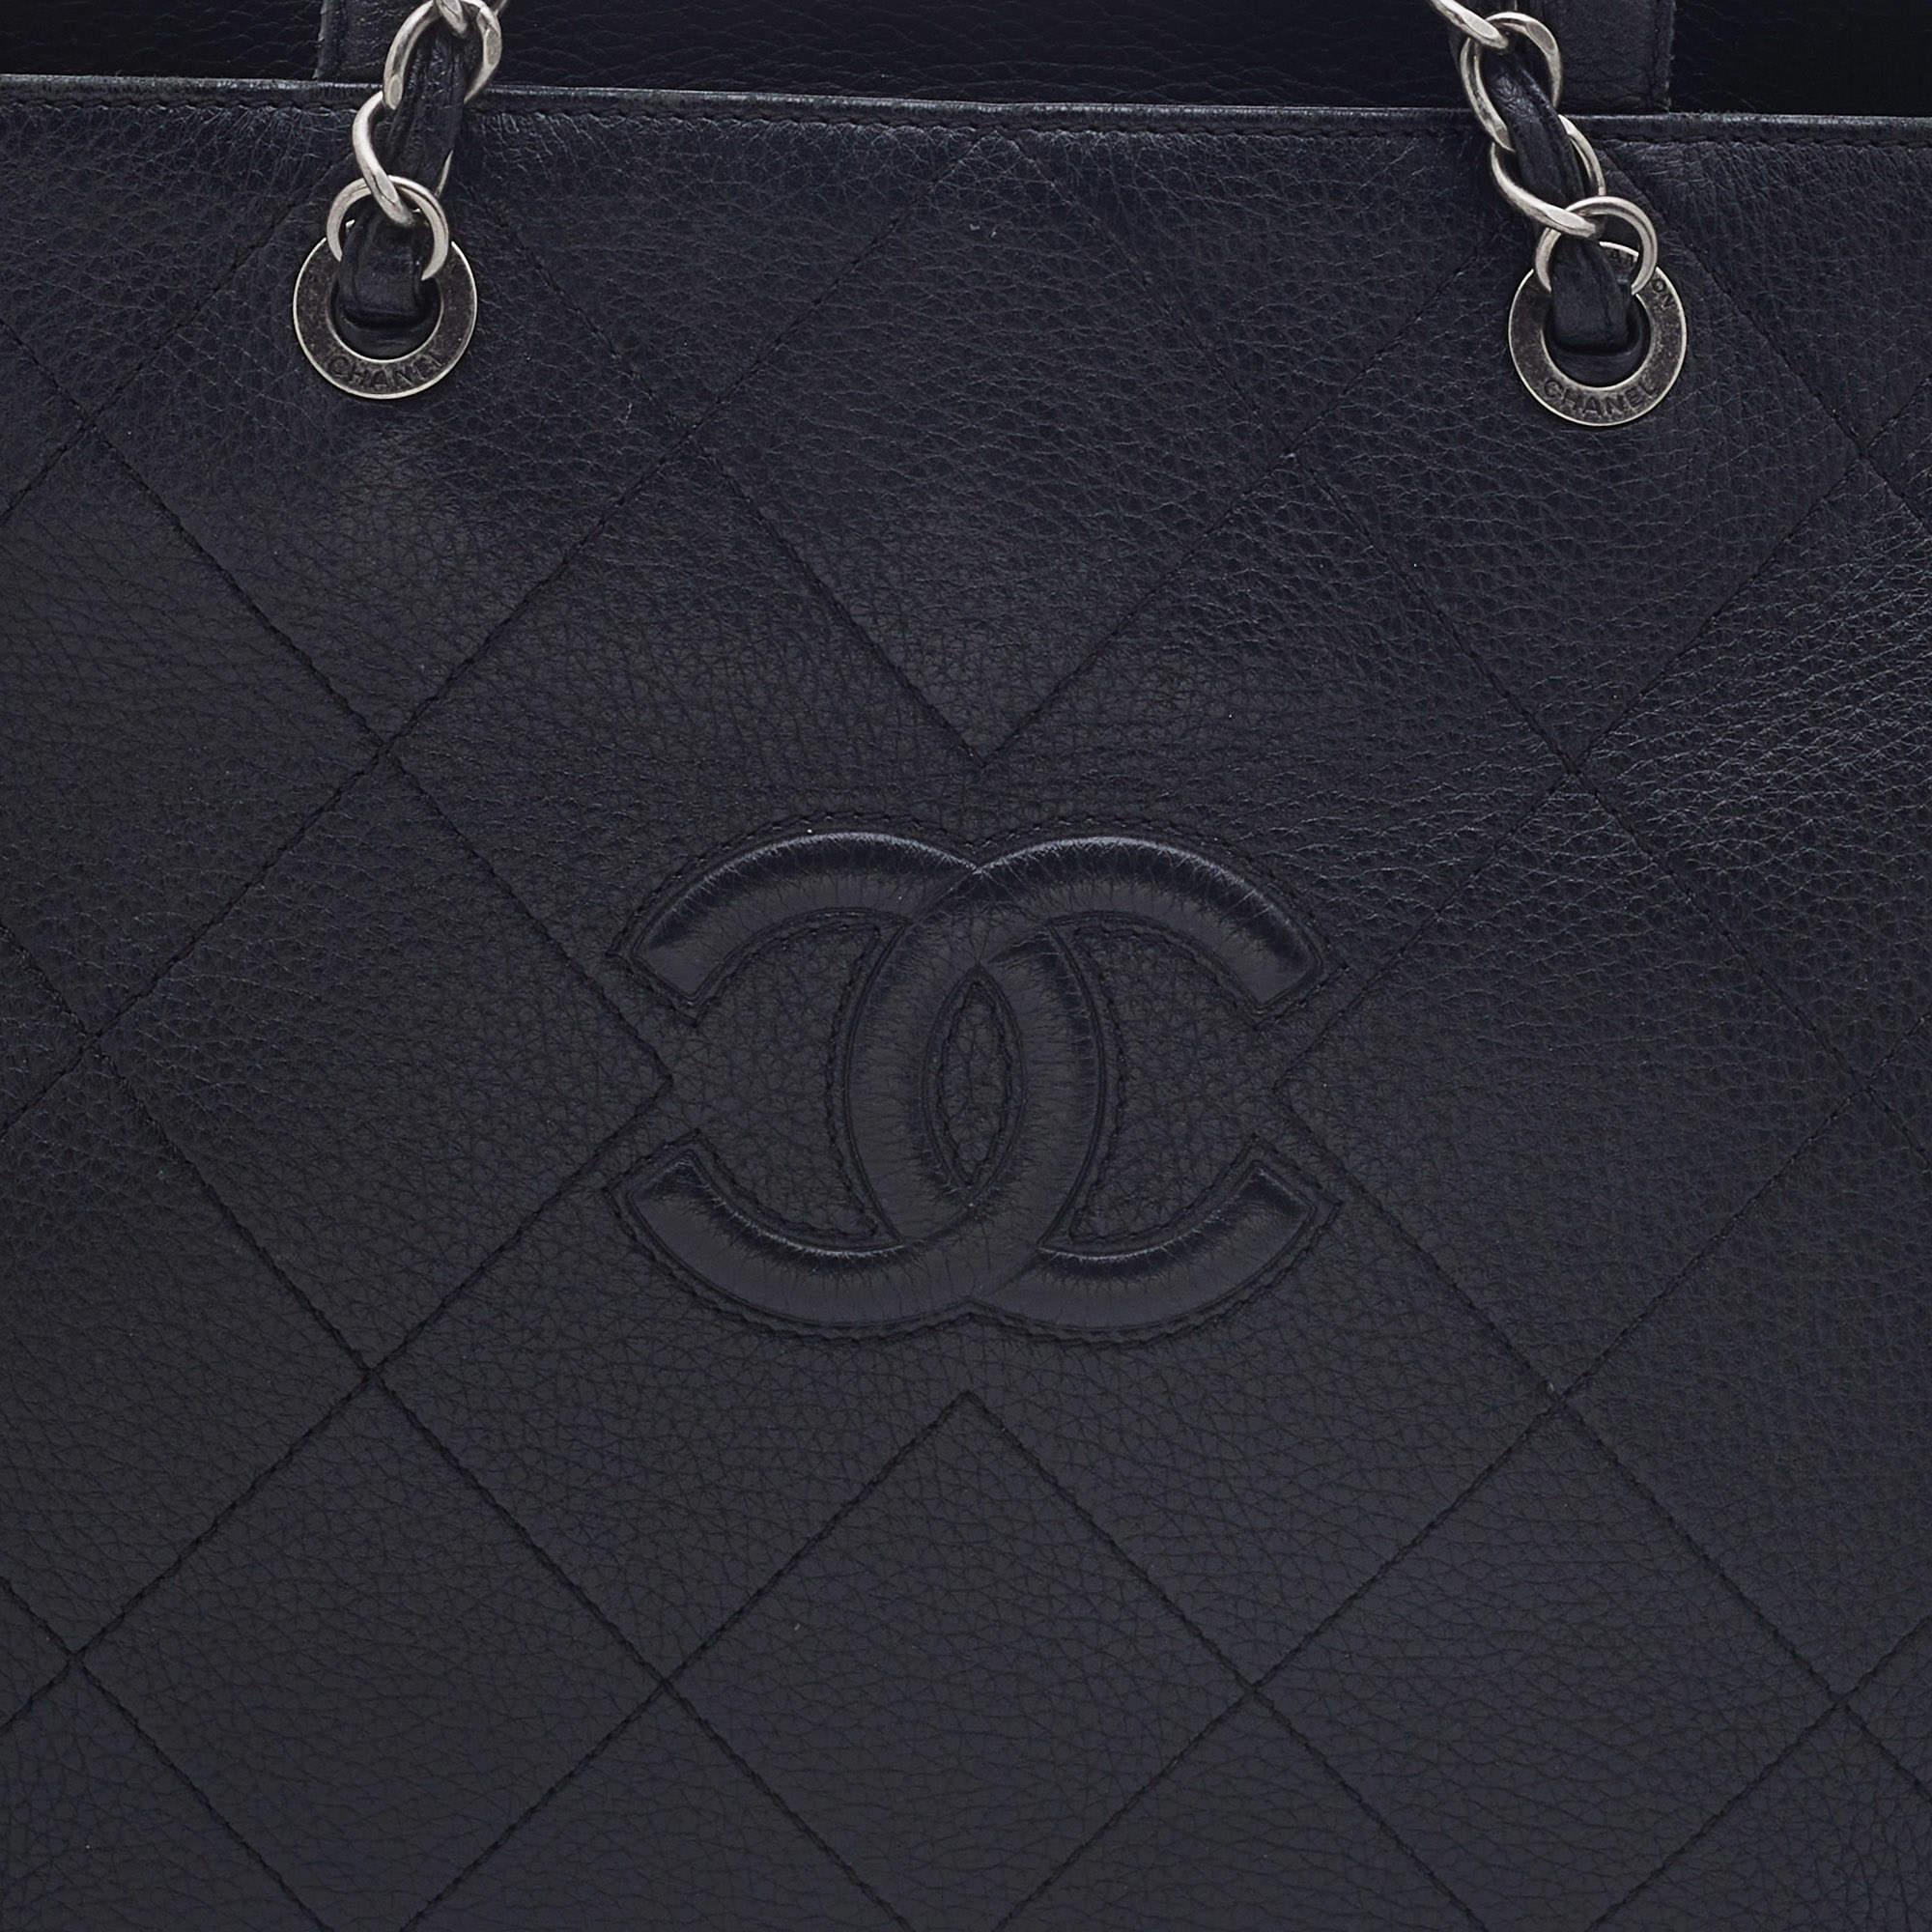 Chanel Black Quilted Leather Medium CC Shopper Tote 6